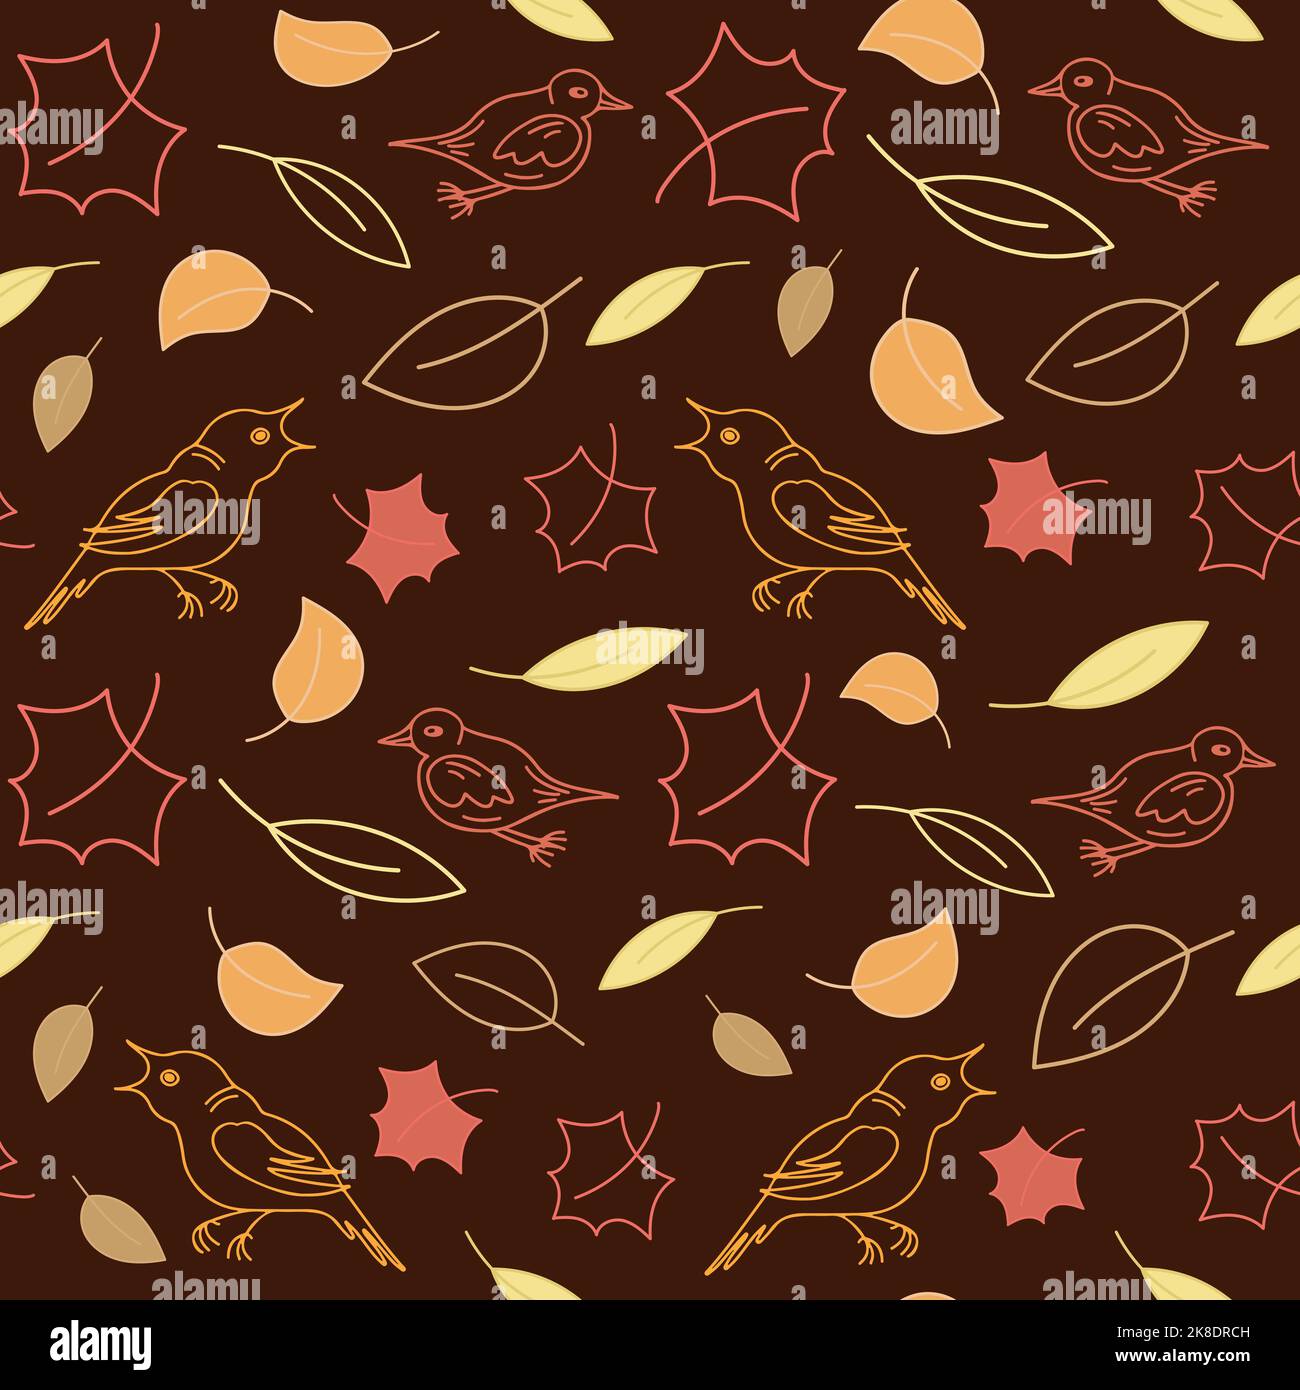 Hand drawn birds and leaves seamless pattern. Autumn pattern on dark brown background. Stock Vector